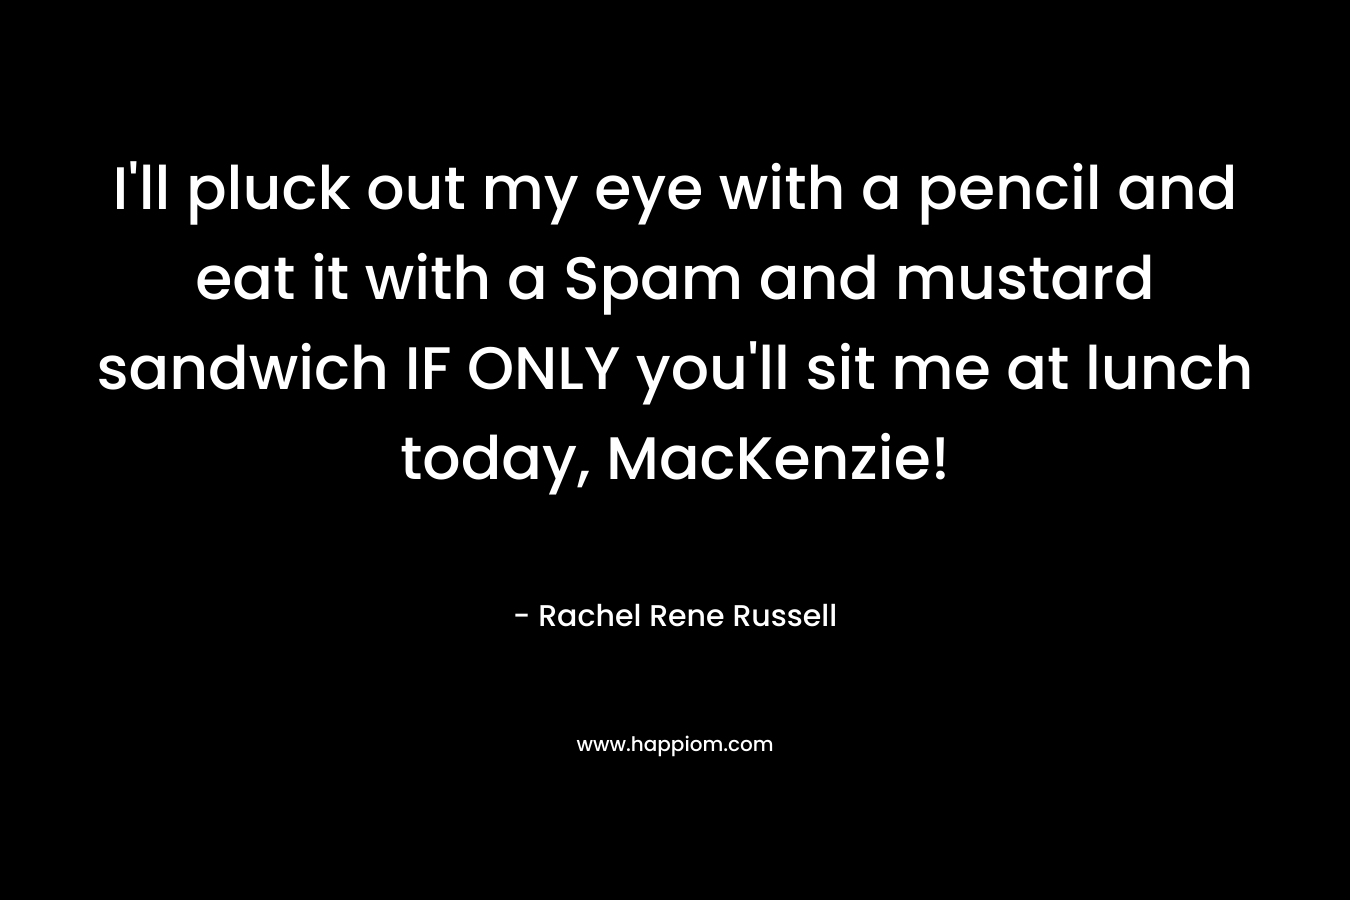 I’ll pluck out my eye with a pencil and eat it with a Spam and mustard sandwich IF ONLY you’ll sit me at lunch today, MacKenzie! – Rachel Rene Russell